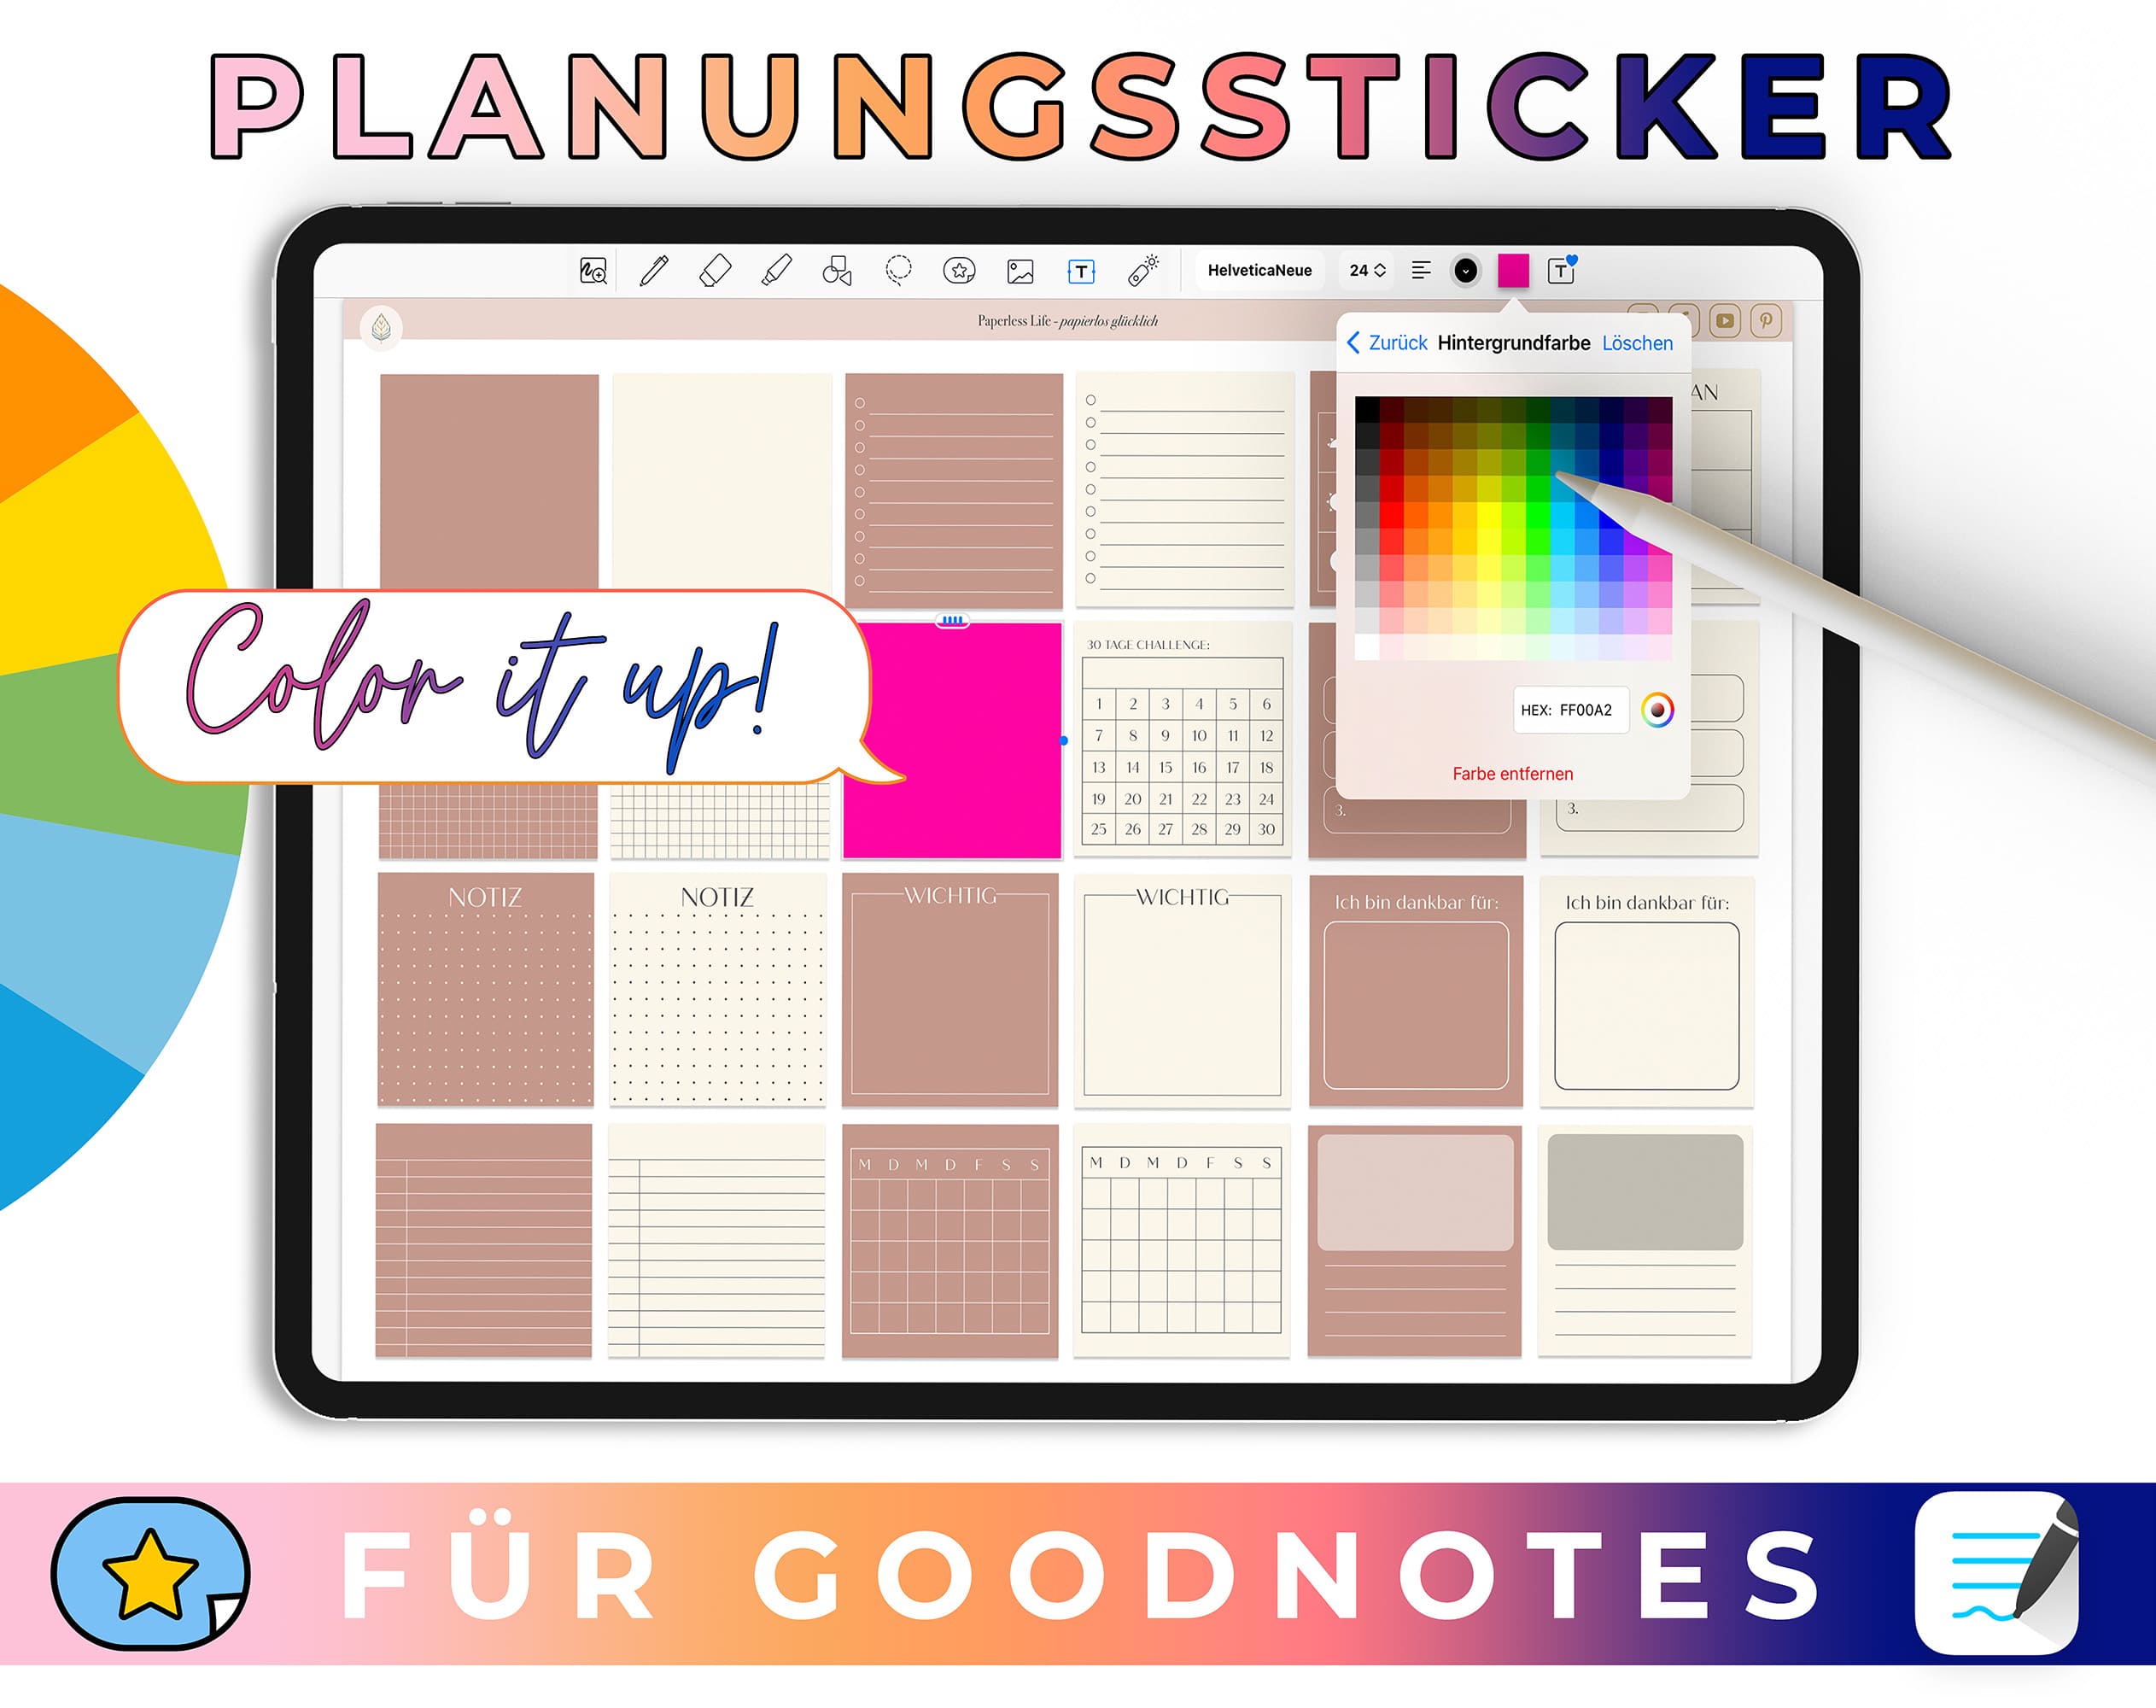 Color Changing GoodNotes Sticker - 52 Basic Planungssticker